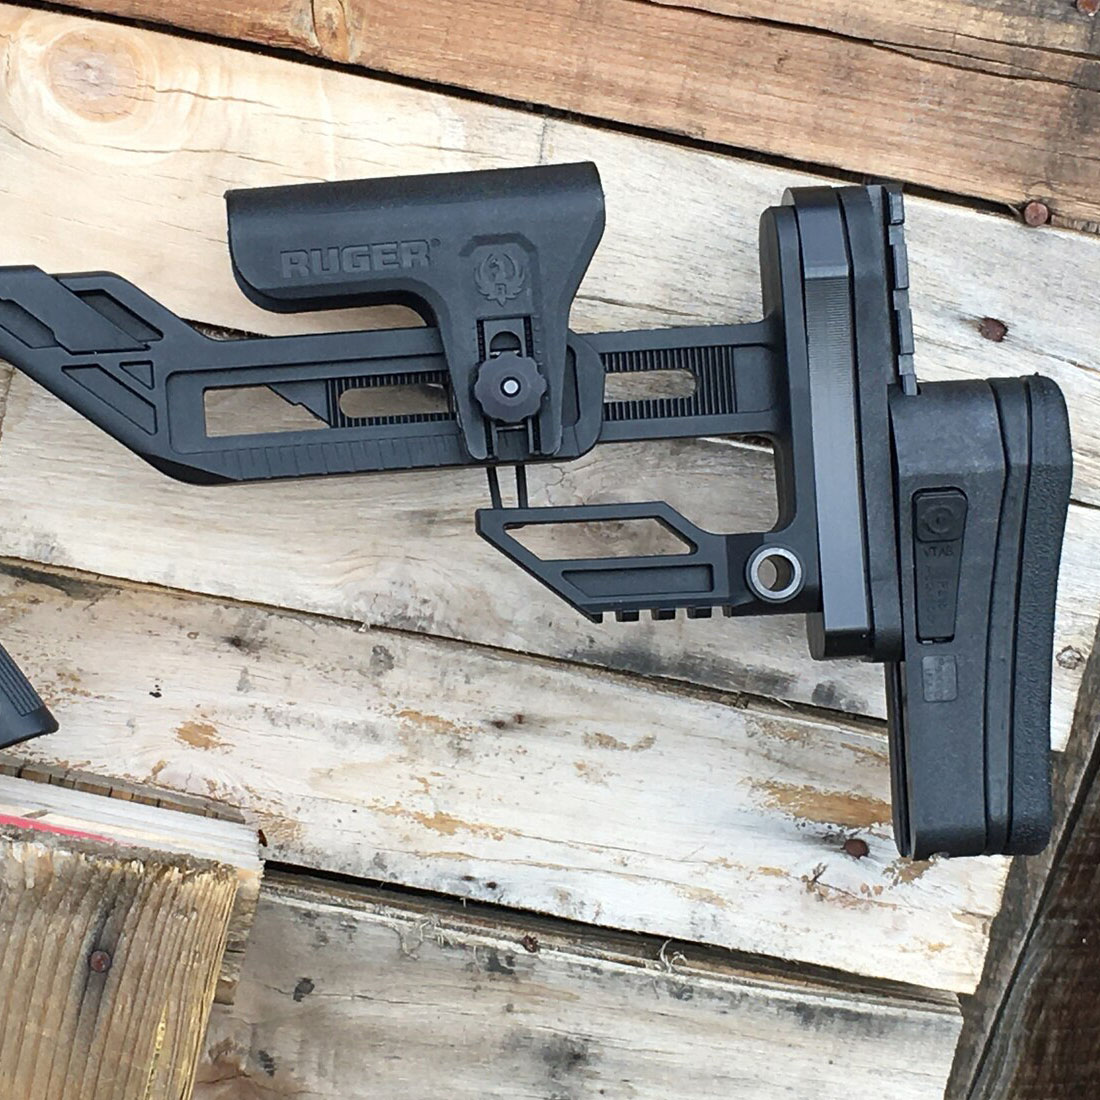 what do I need to get this to mount to my rpr..what magpul part?